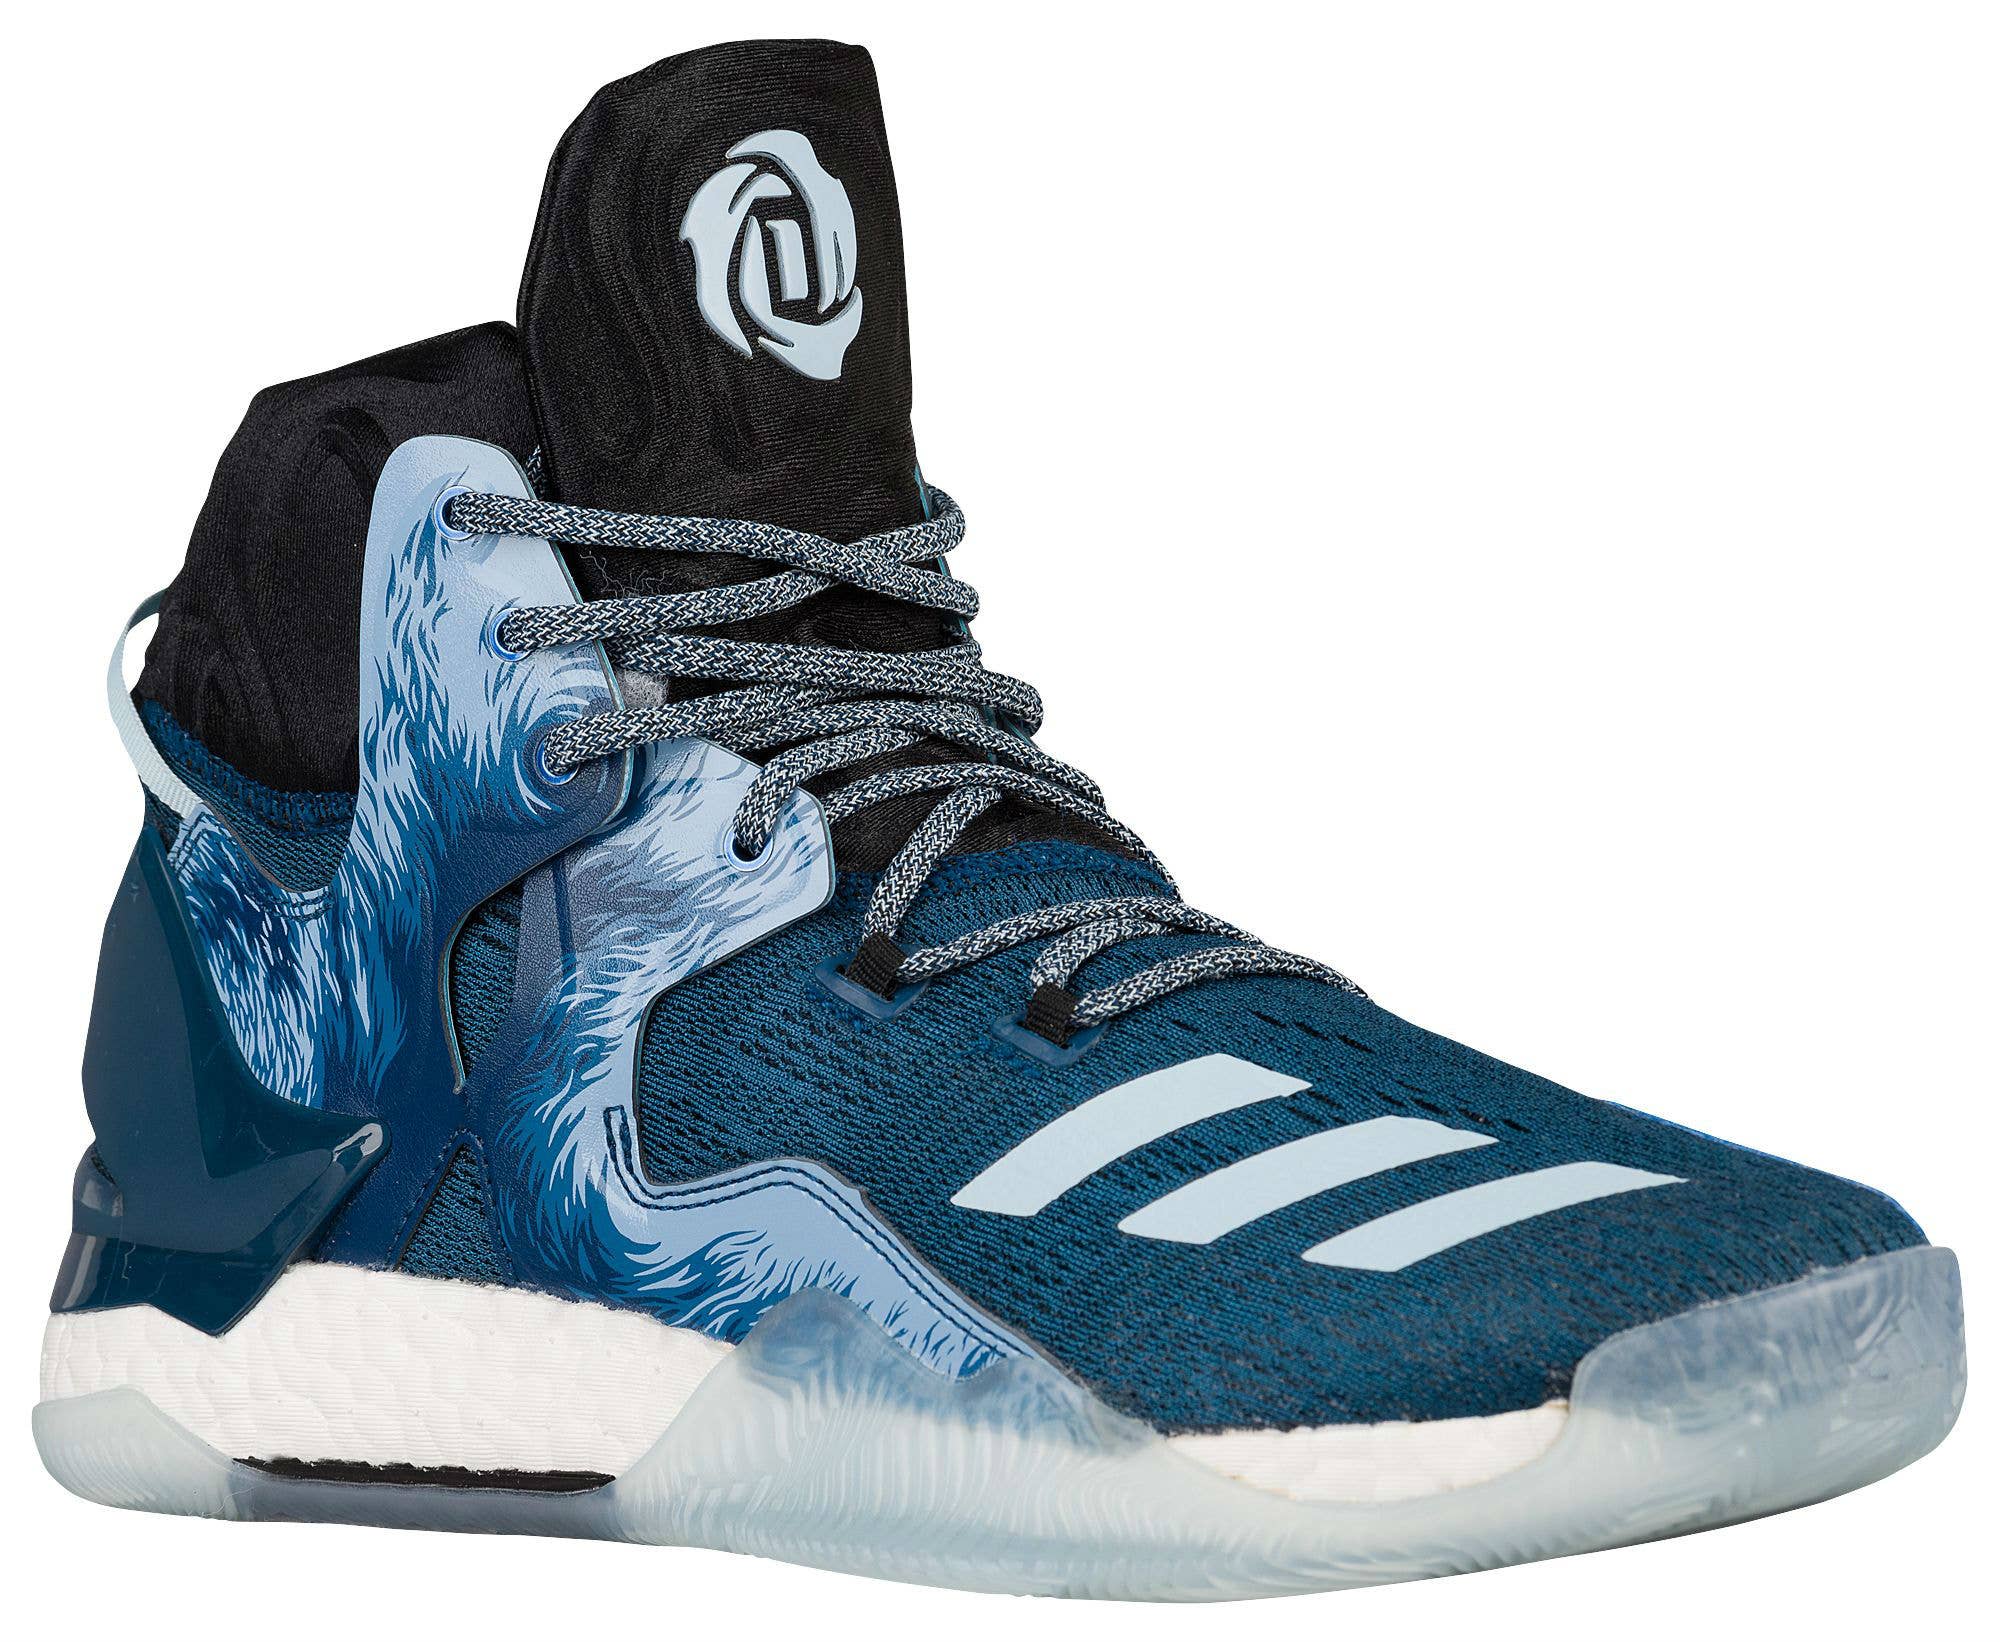 These May Be Derrick Rose's Sneakers for Halloween